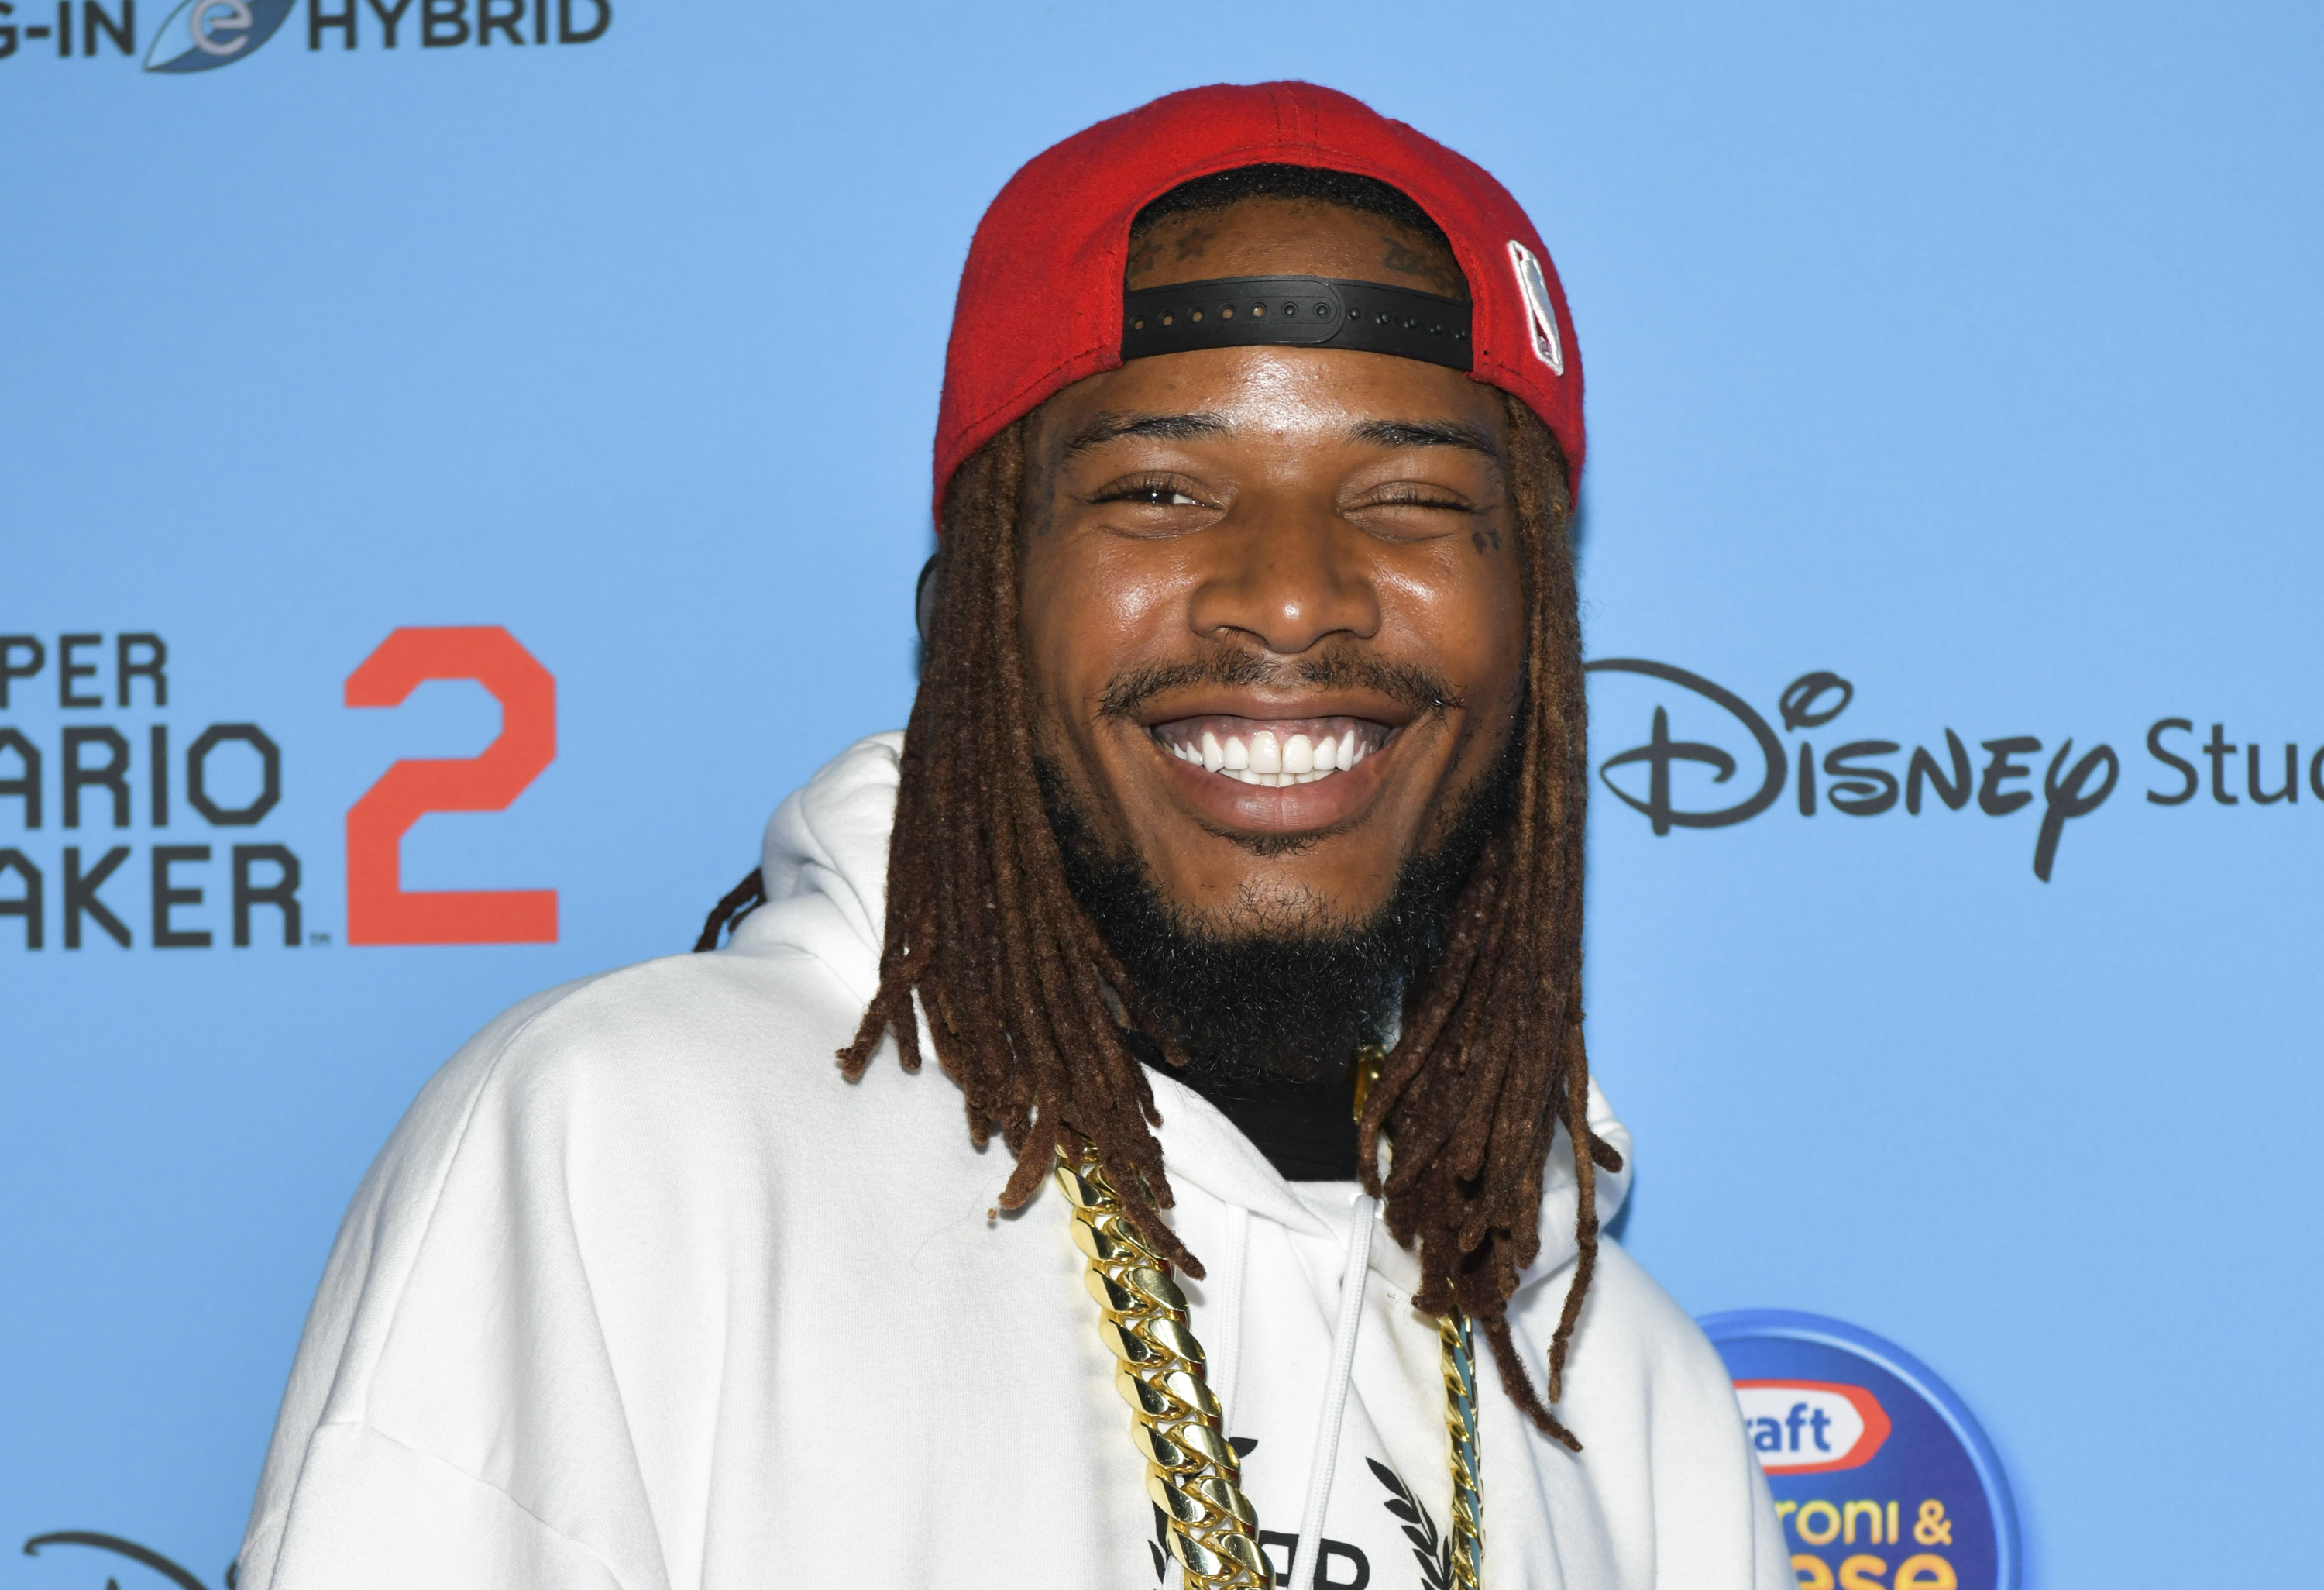 Fetty Wap’s Baby Mamas Collectively Drag Him On Christmas For Deadbeat Ways